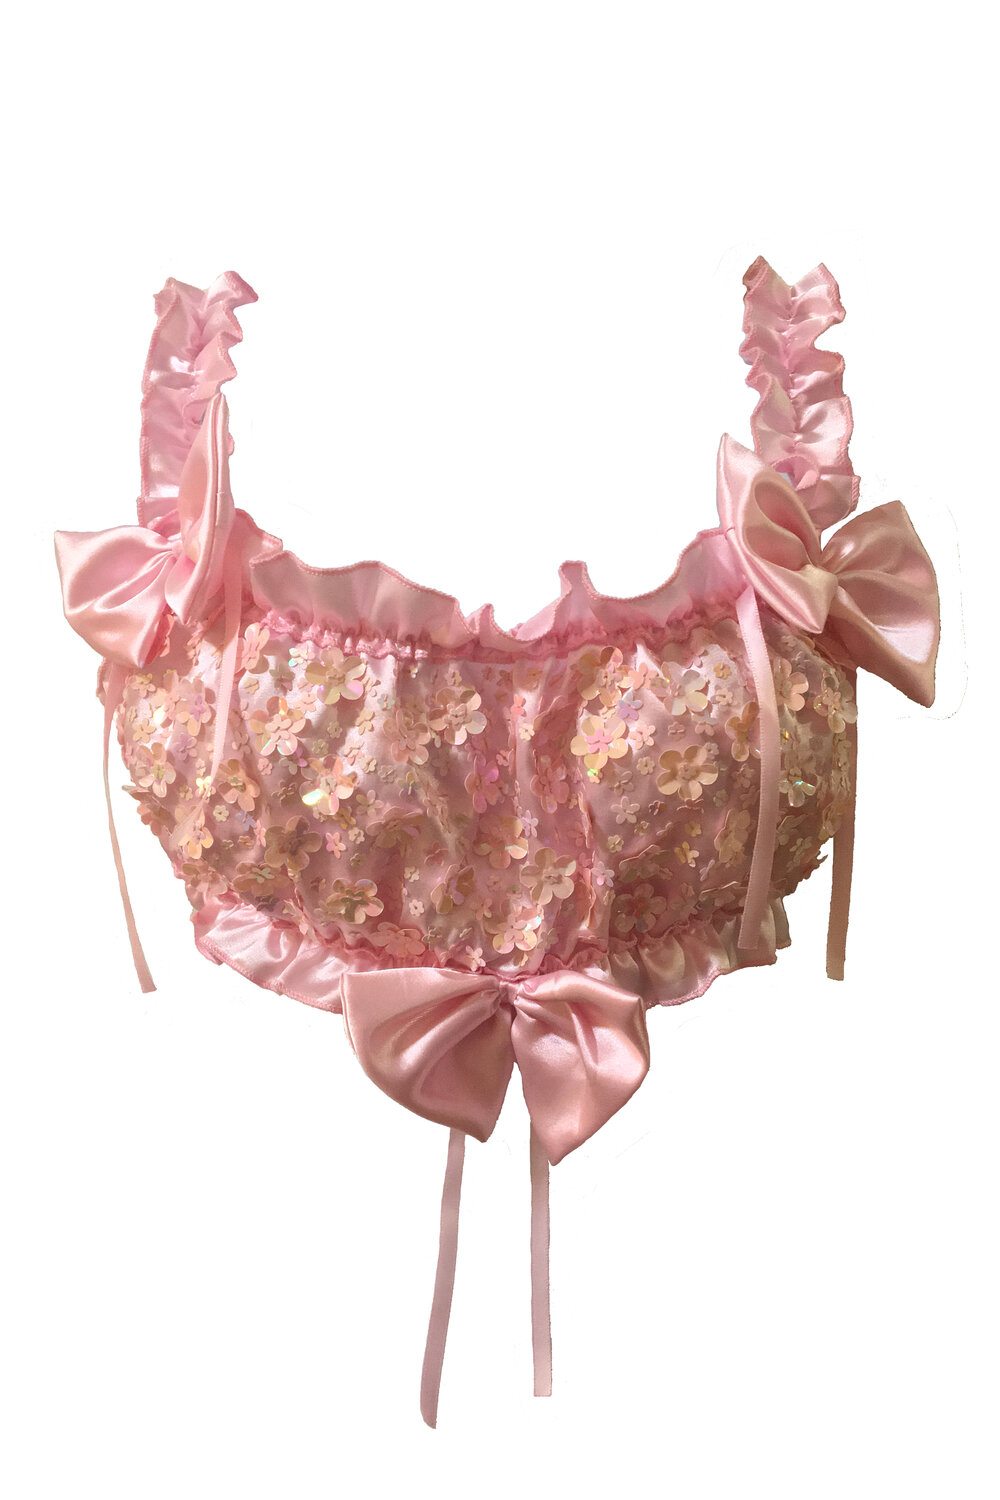 shop all collections - MADE TO ORDER - VEVAY floral sequin satin bra top -  KELSEY RANDALL